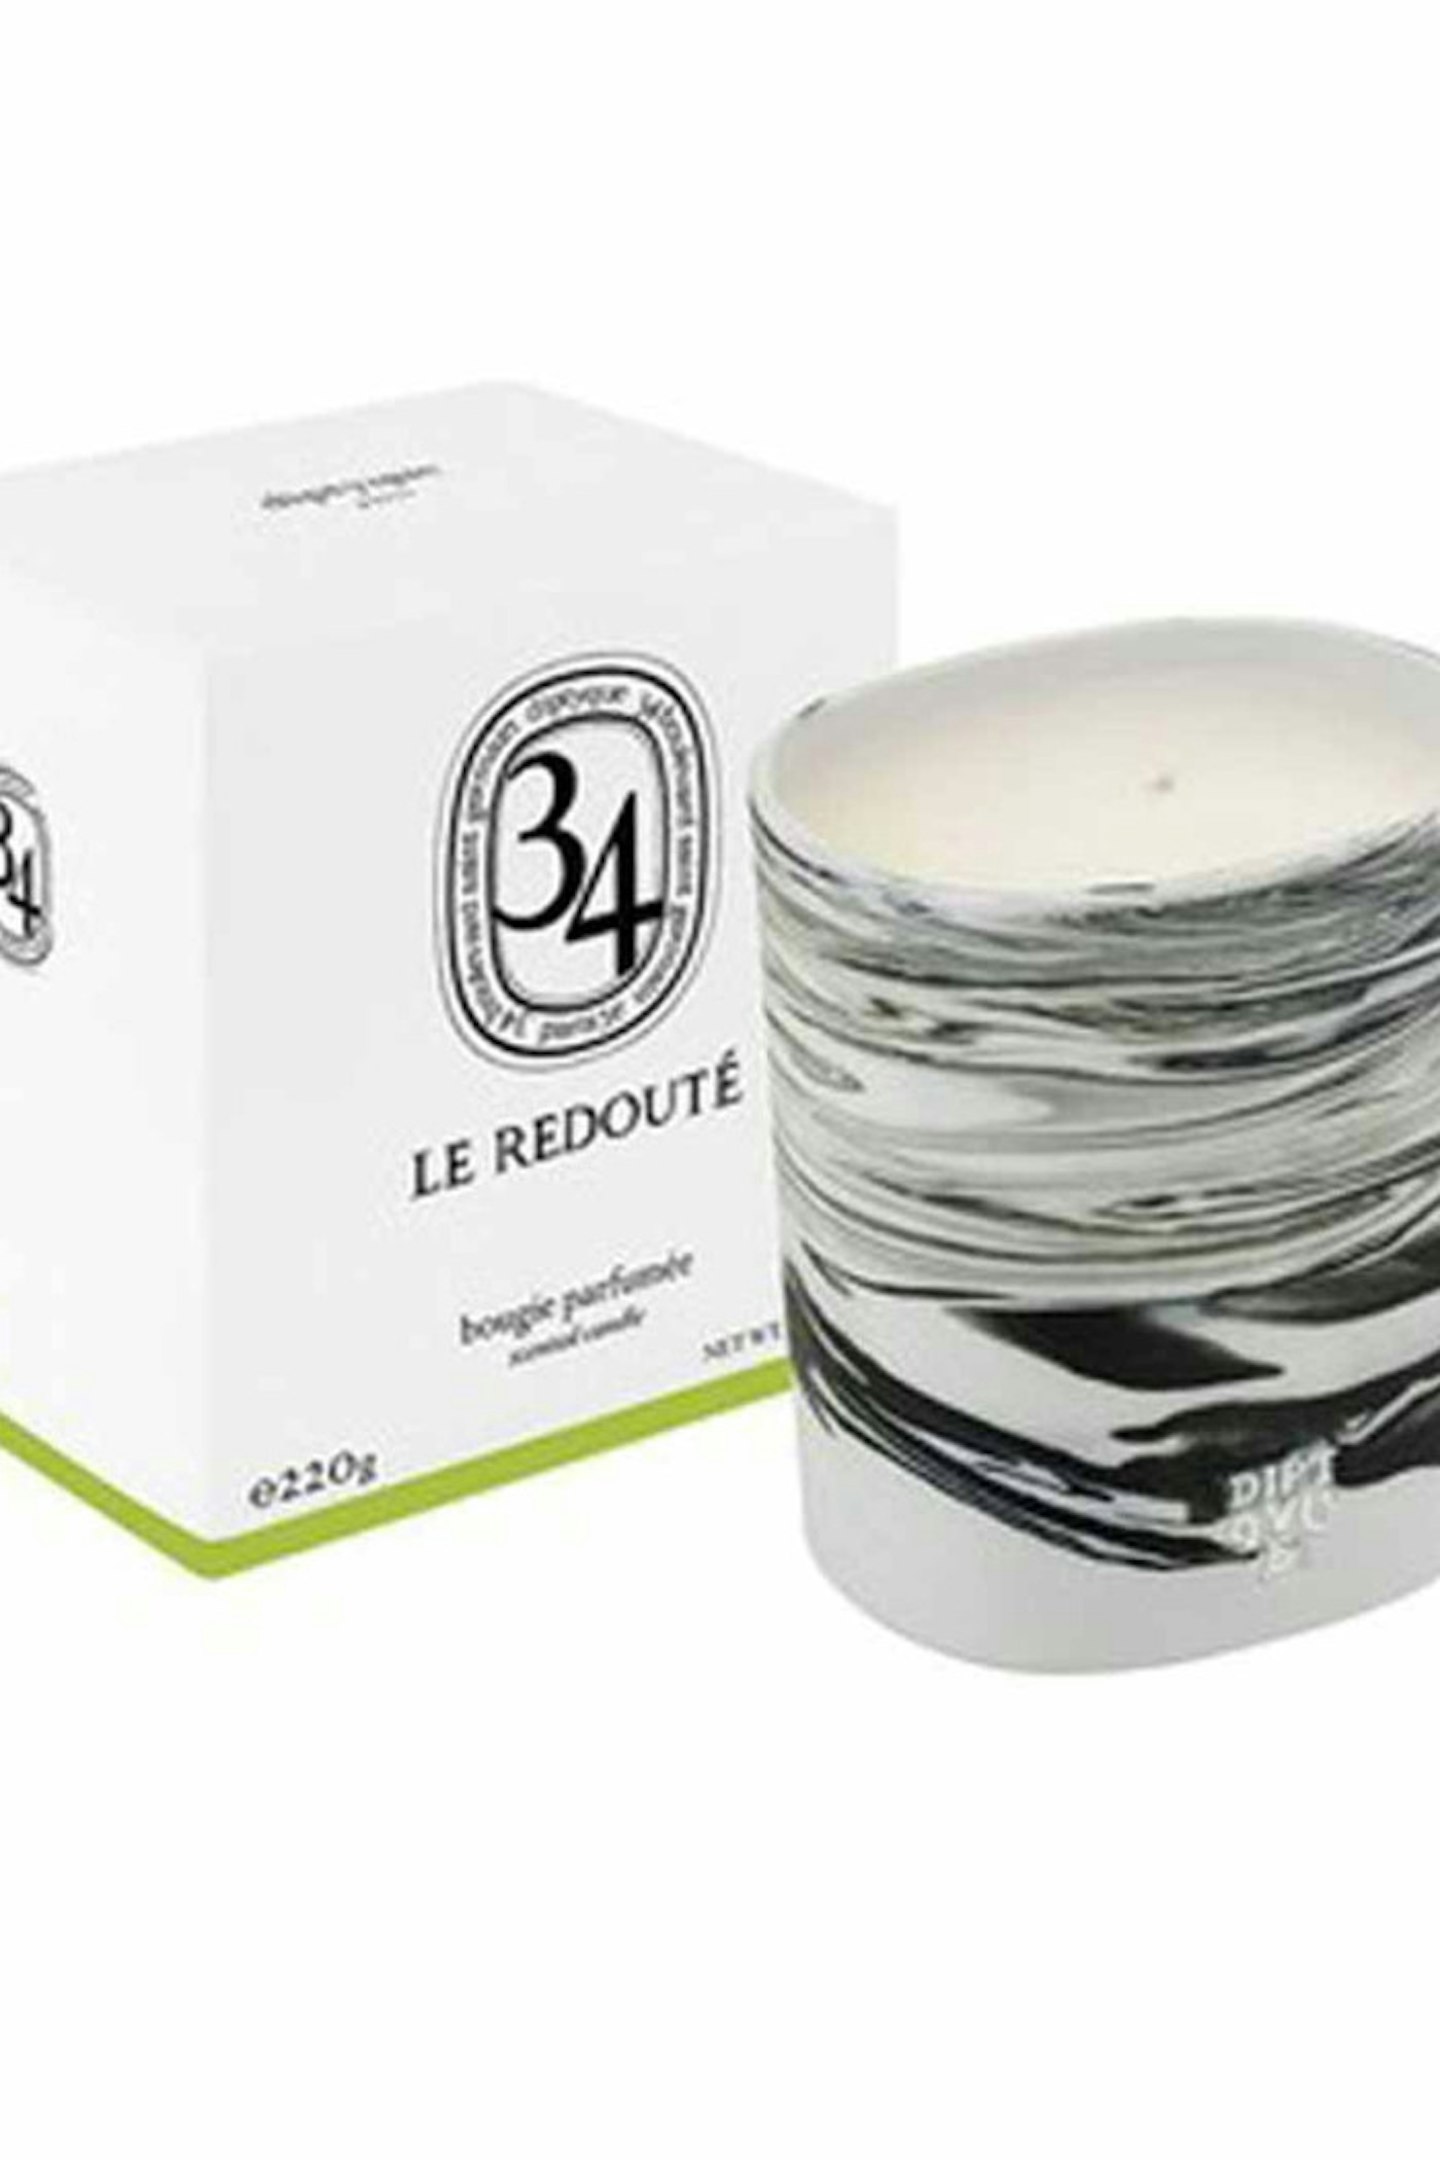 5. Diptyque La Redoute Scented Candle, £55